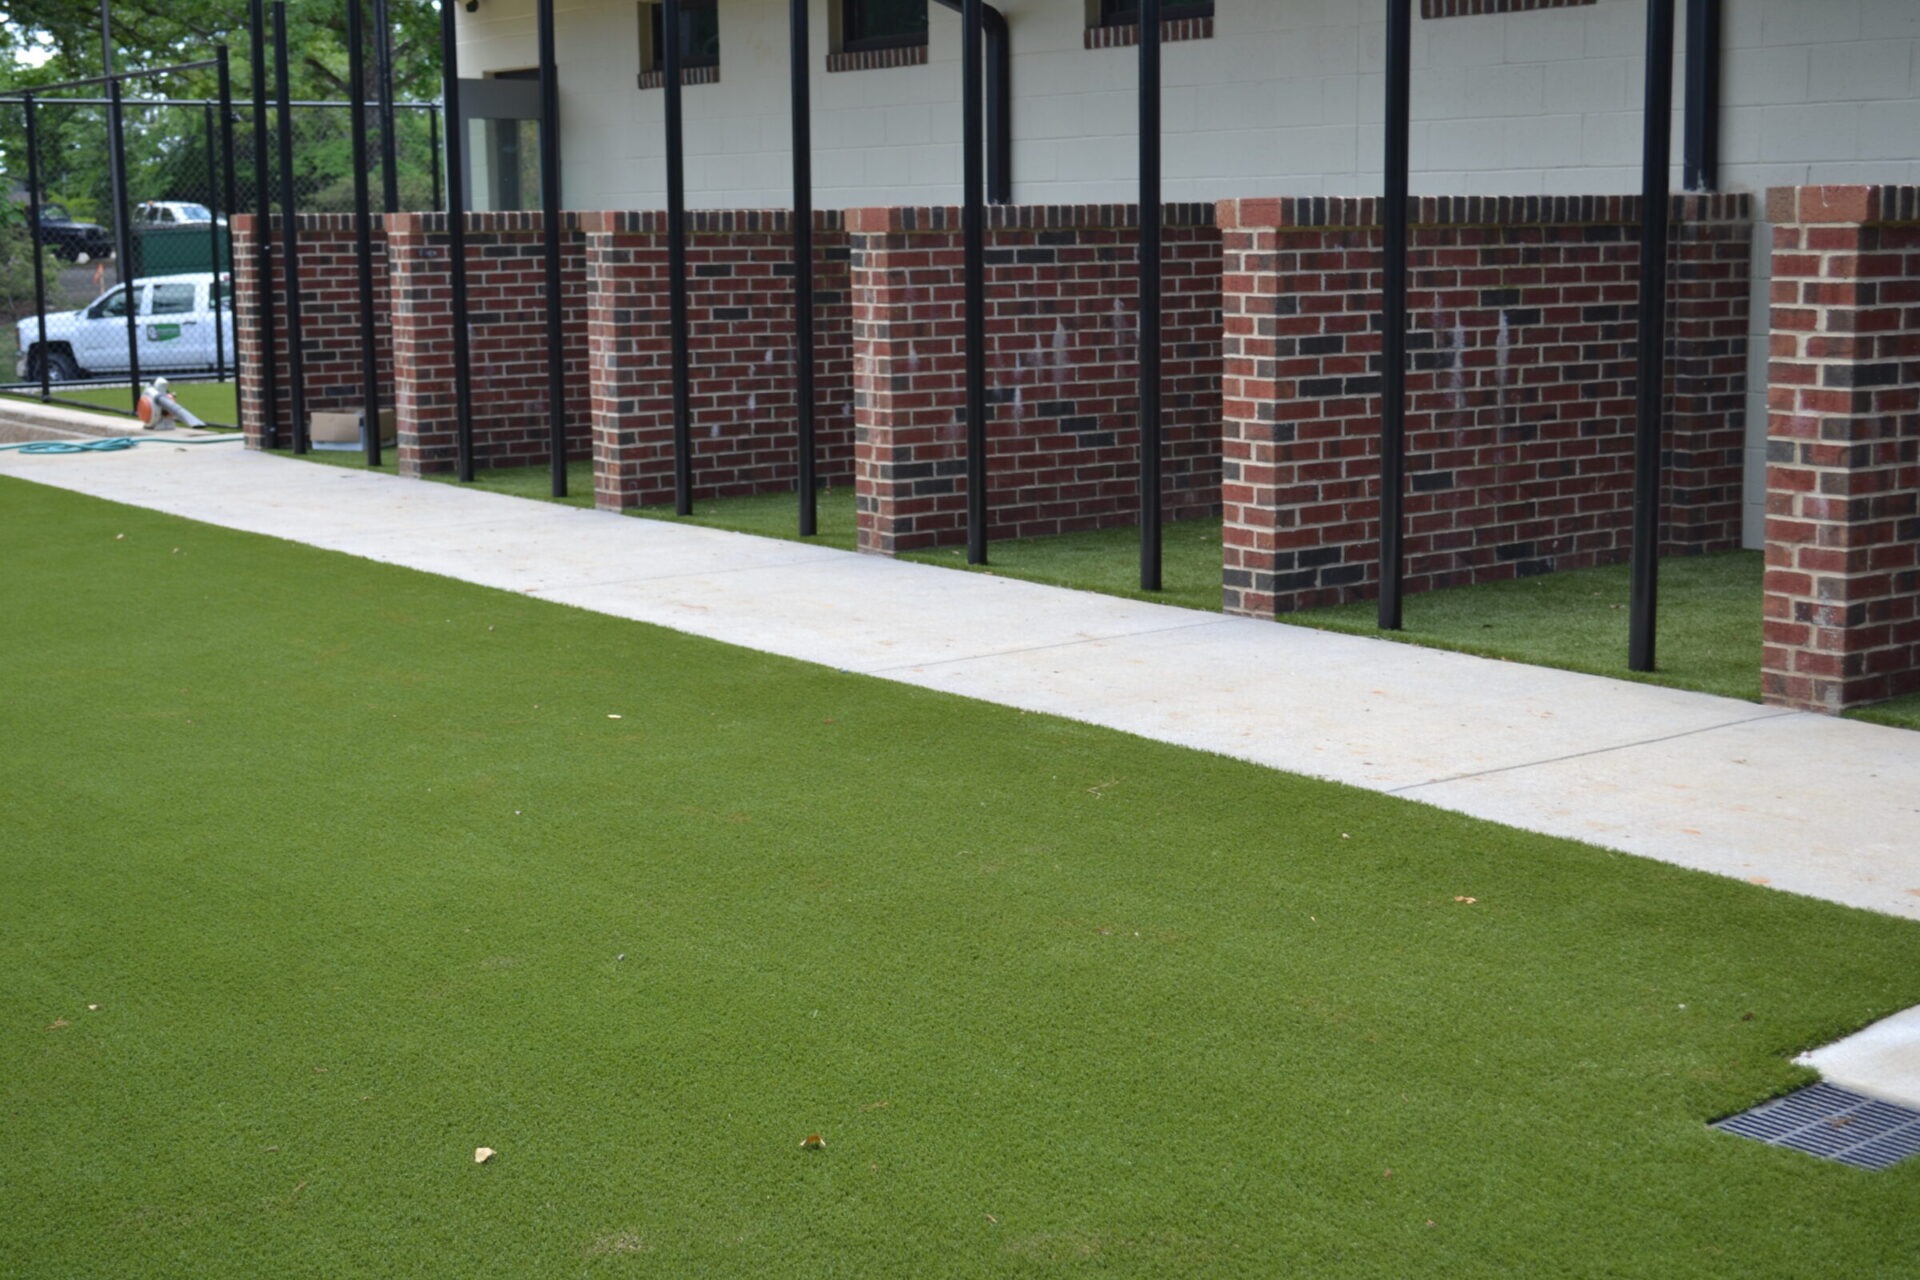 The image shows a well-maintained area with artificial green turf bordering a concrete walkway beside a brick structure with black metal fencing.